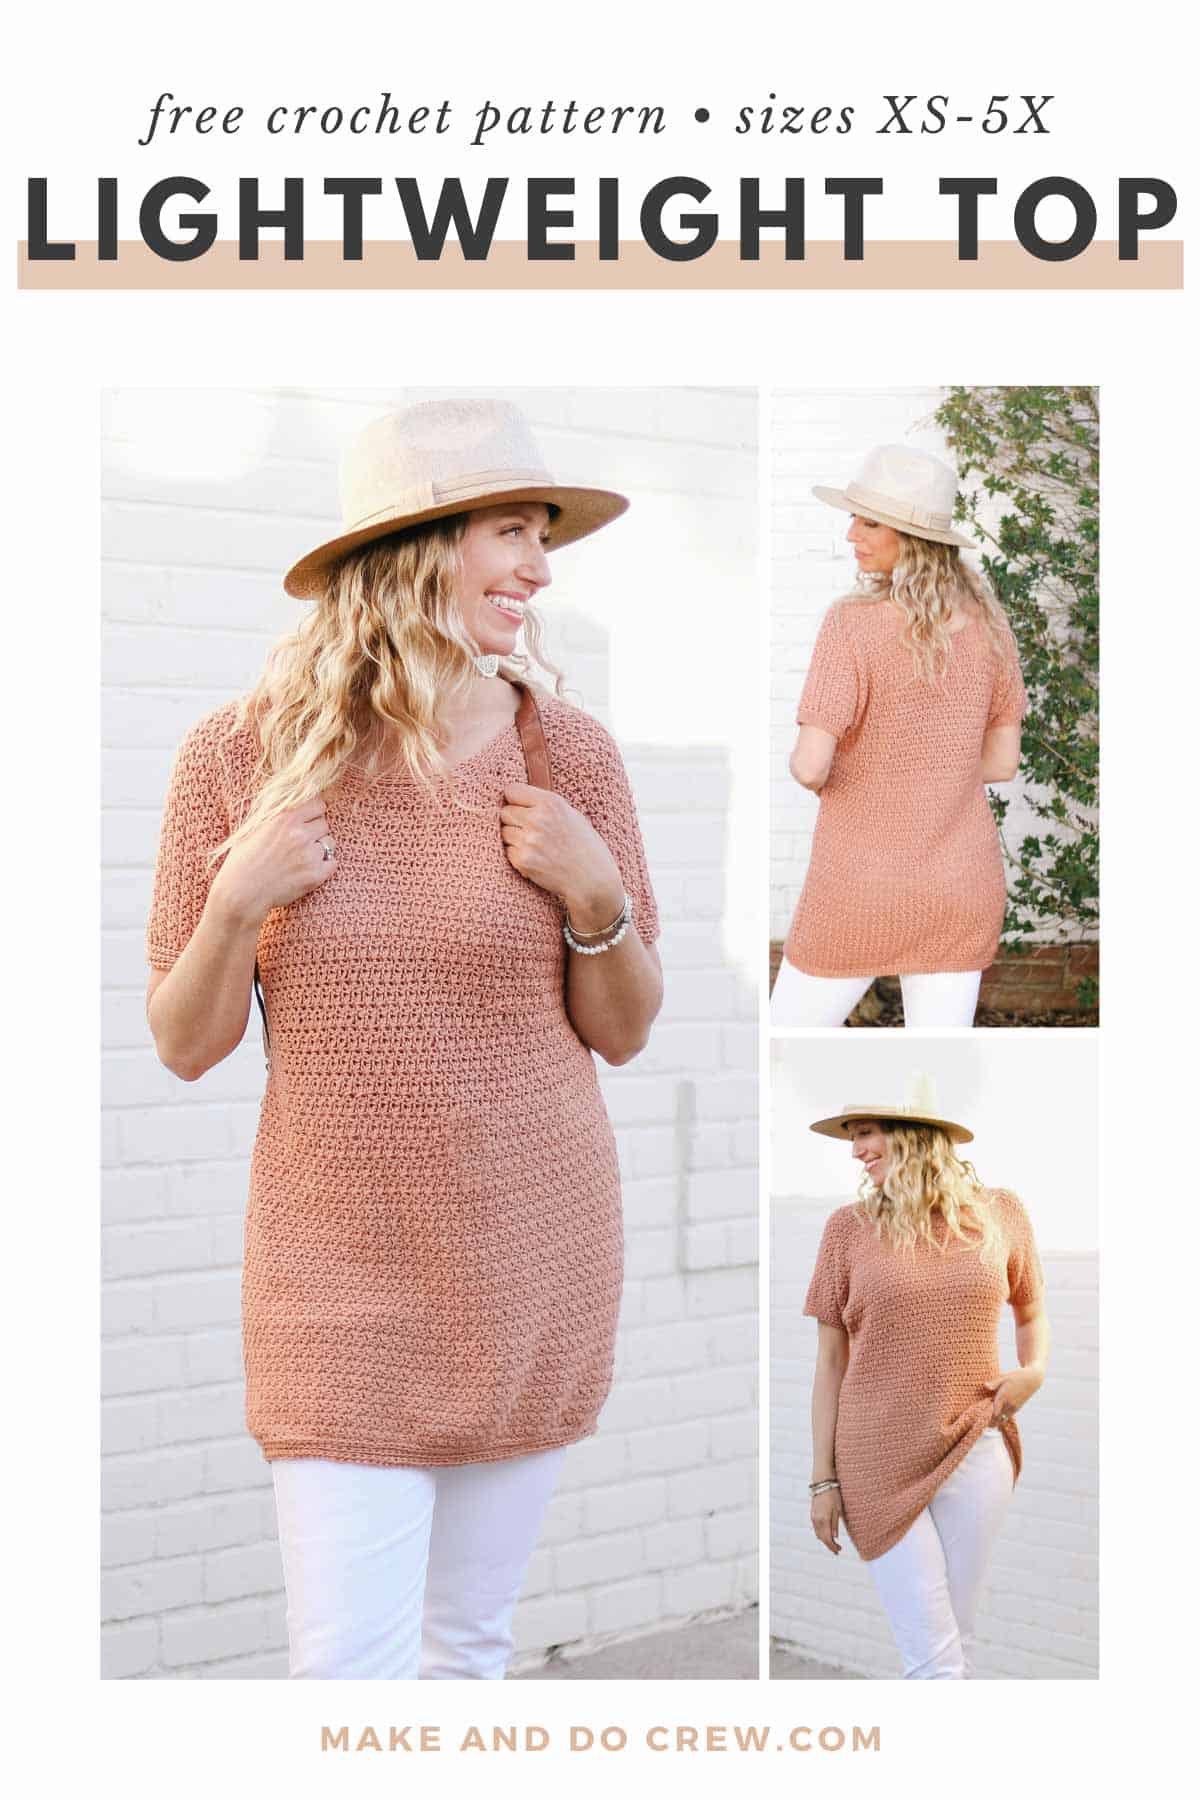 This image shows three photos of a woman wearing a long crochet tunic, white pants and a tan hat. It is showing a free crochet pattern for a lightweight top.